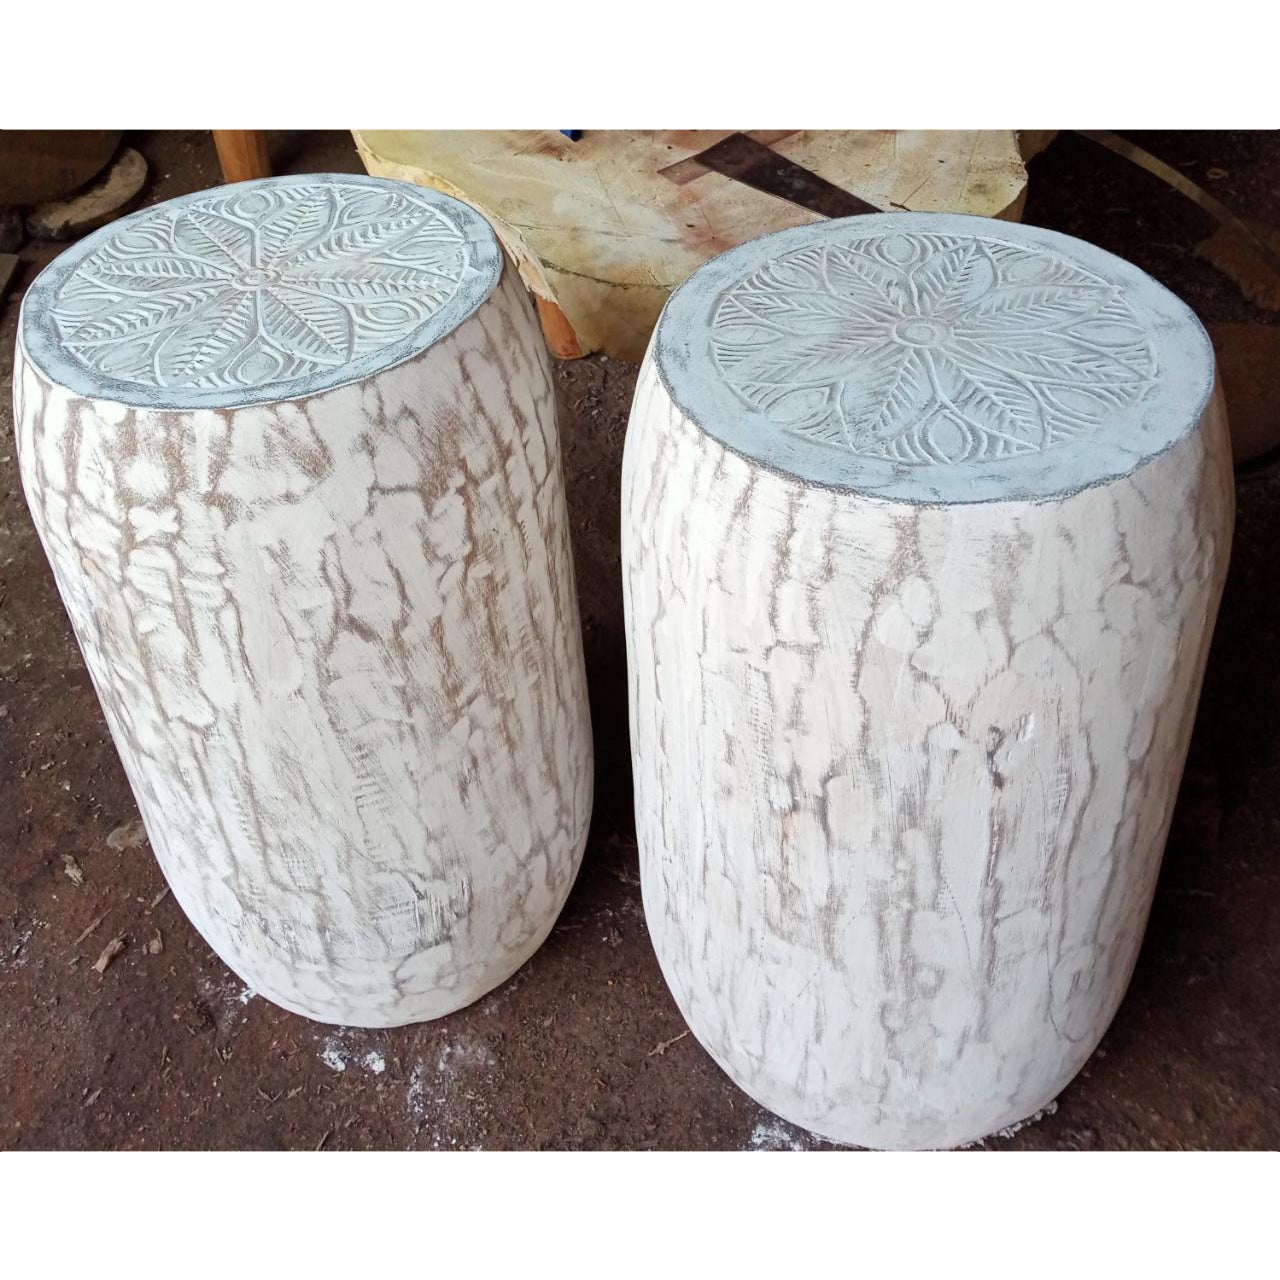 Tribal Carved Palm Stool - White Wash | Pre Order